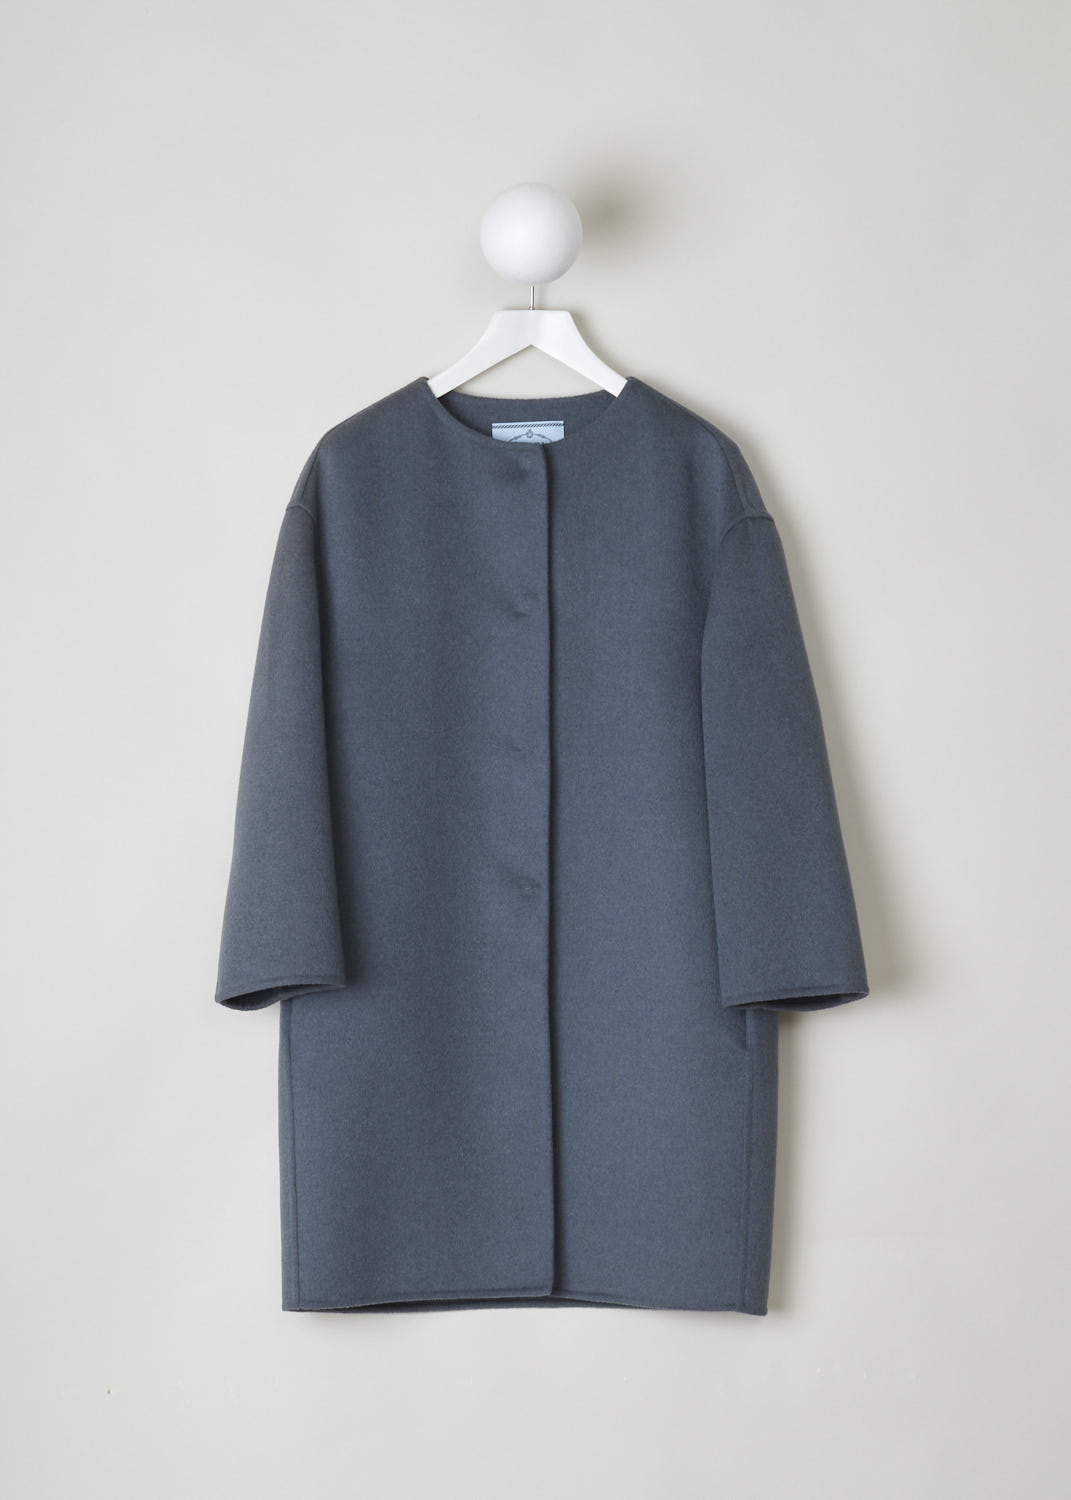 PRADA, GREY COLLARLESS COAT, CASH_GORA_P6734_FOE04_TITANIO, Grey, Front, Chic grey collarless coat. This sleek coat has a rounded neckline and a concealed front button closure. Slanted pockets can be found concealed in the seam on either side.